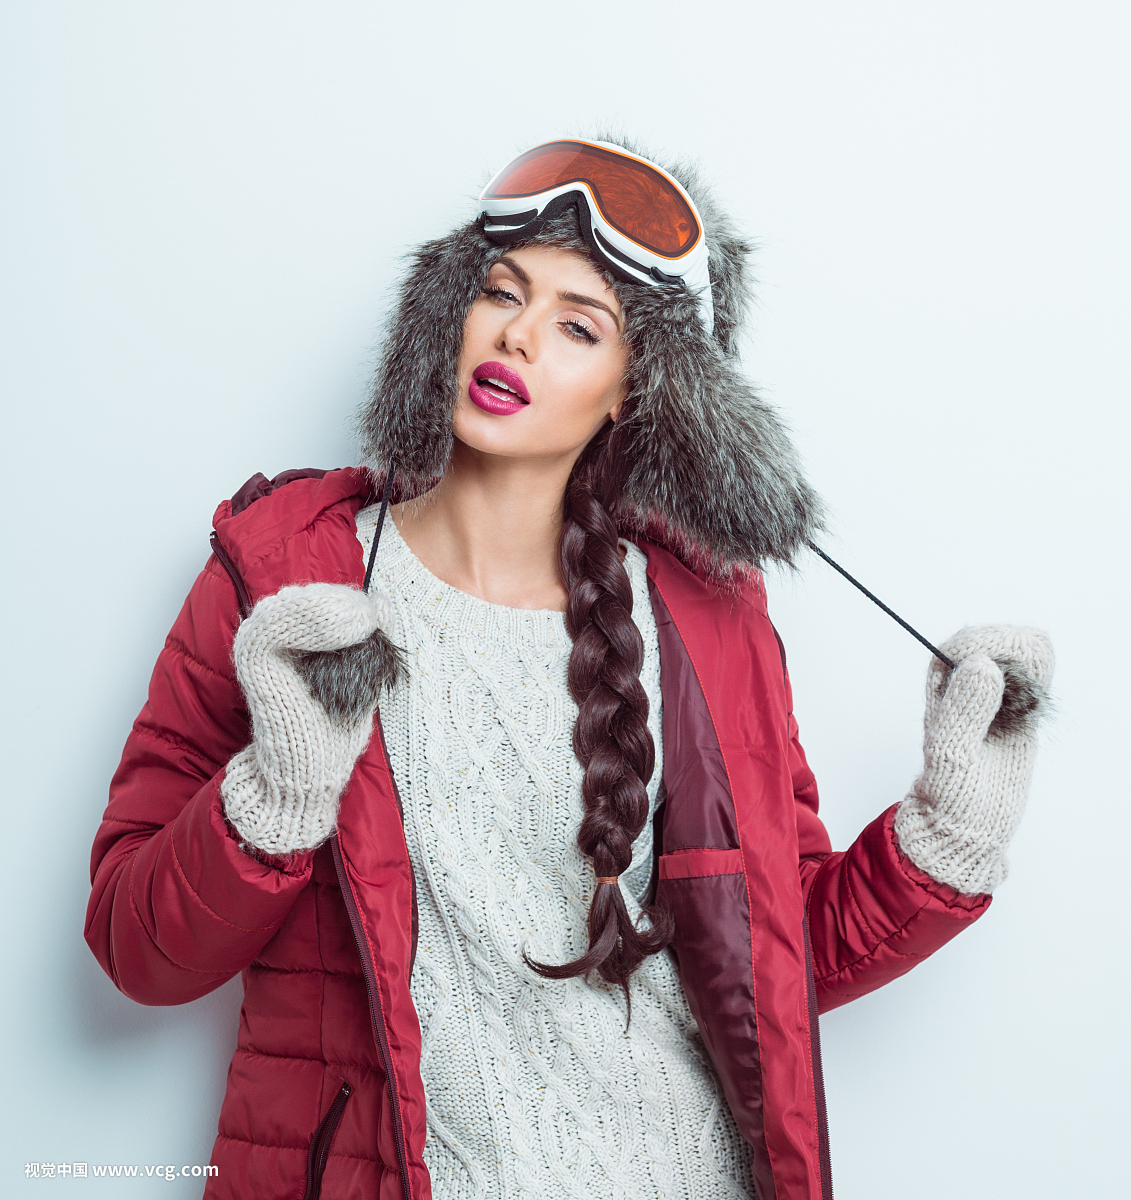 Sensual woman in winter outfit - puffer jacket, fur hat